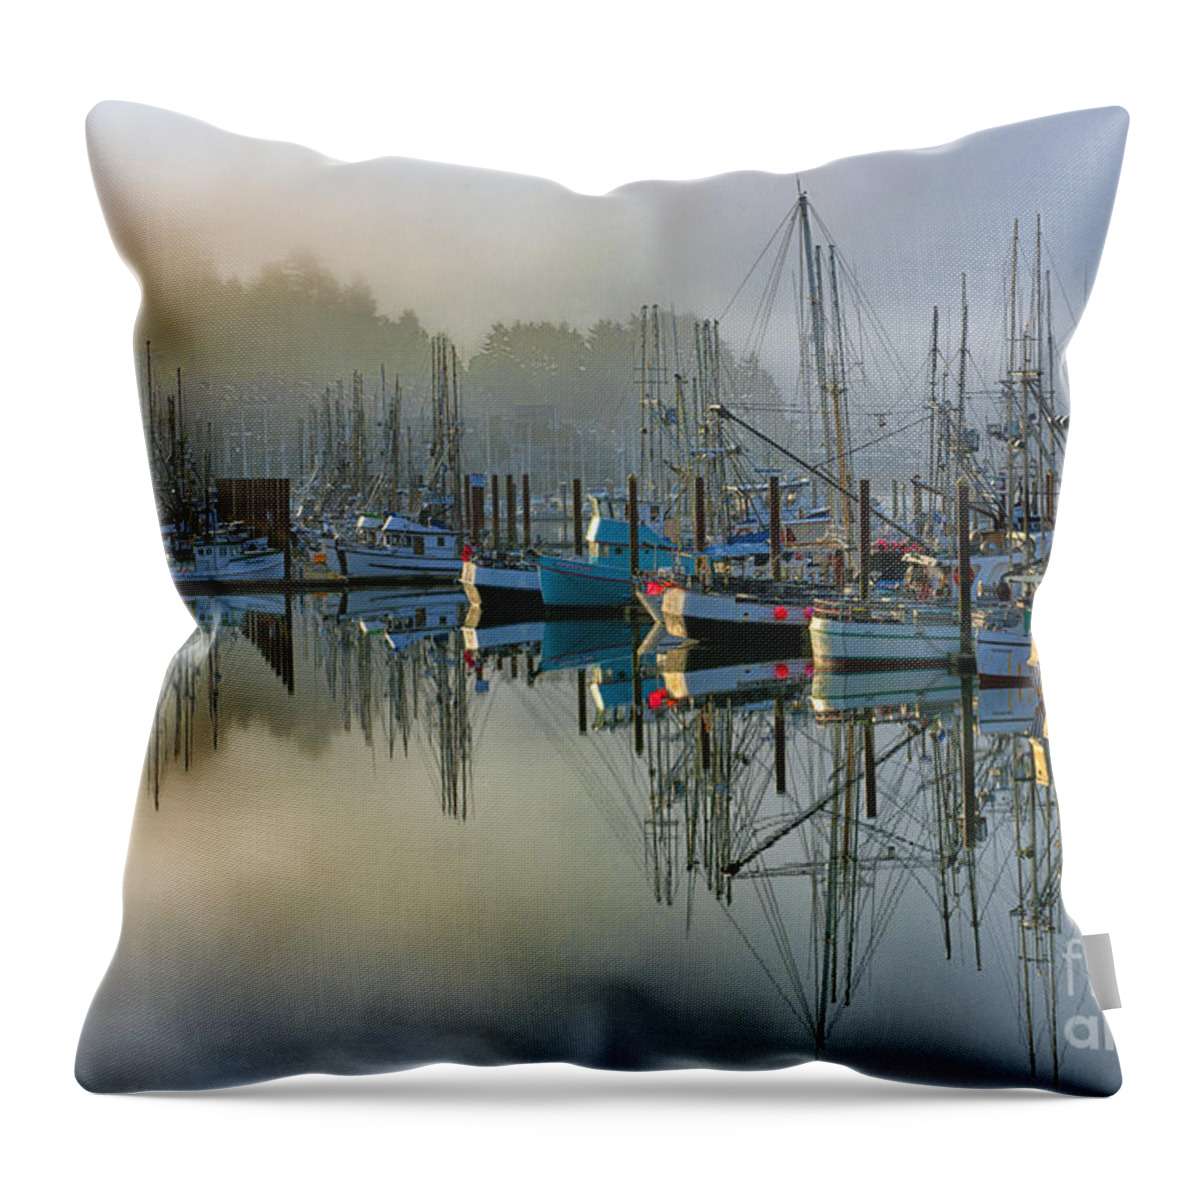 Harbor;sunrise;boats;fog;mist;clouds;reflection;reflections;harbors;newport;oregon;pacific;northwest;scenic;scenics;fishing;waterscape;waterscapes;sandra Bronstein;mirror;colorful;horizontal;morning;moody;fine;art;photography;canvas;prints;posters;greeting;cards;notecards;iconic;tourism;travel;port;seaport;acrylic;photographs; Throw Pillow featuring the photograph Sunrise At Newport Harbor by Sandra Bronstein